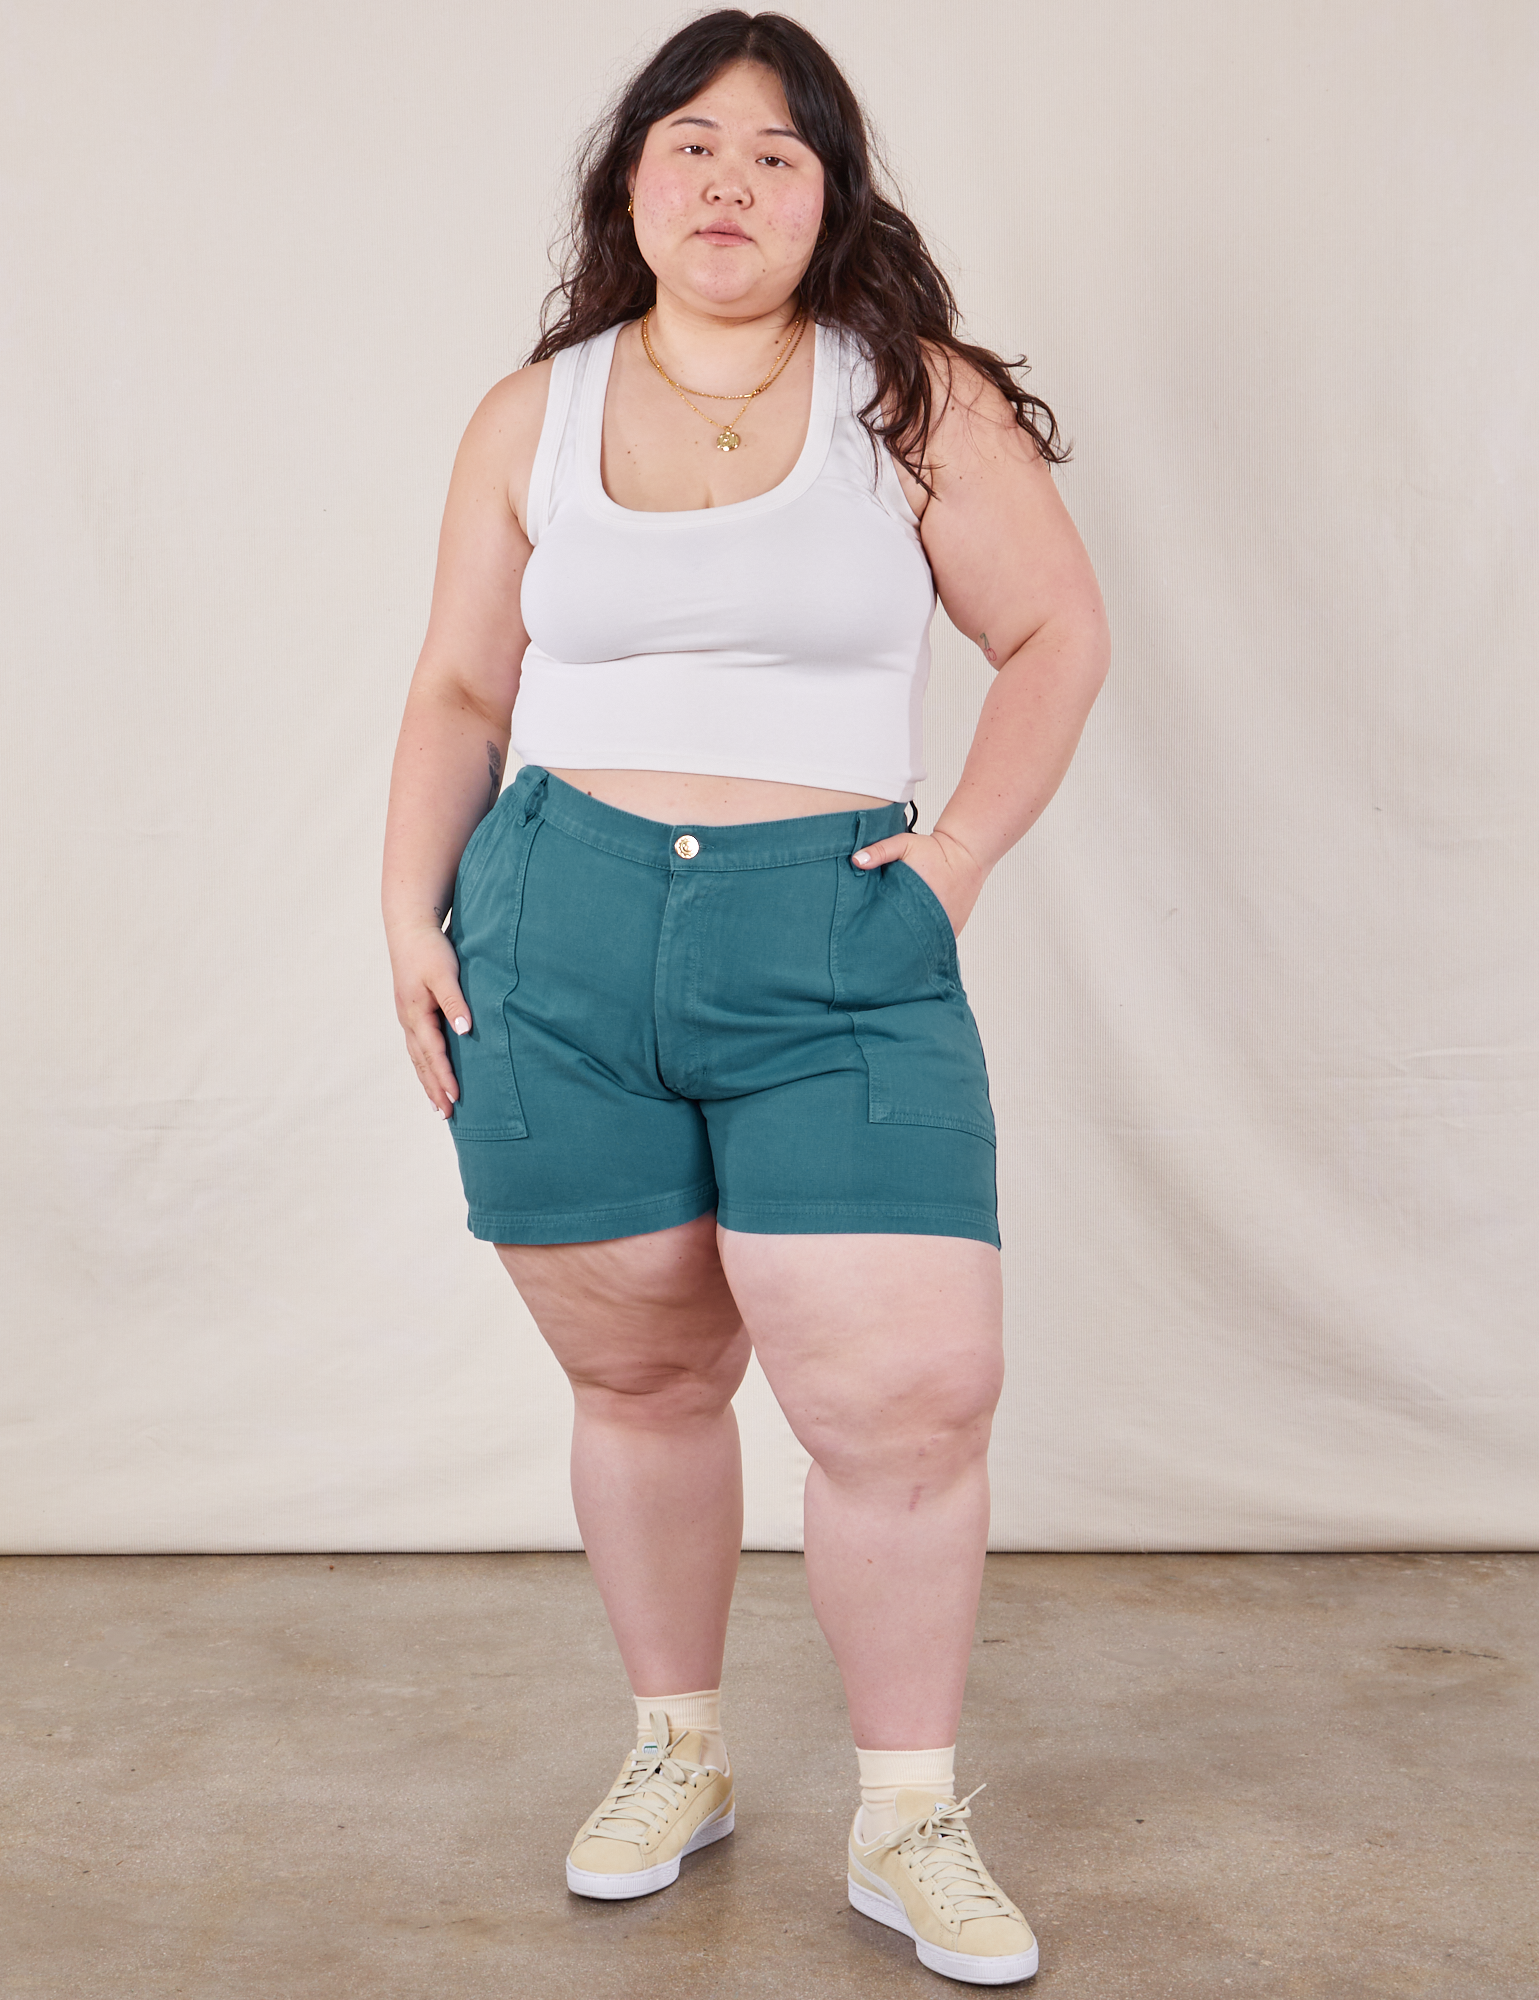 Ashley is 5’7” and wearing 1XL Classic Work Shorts in Marine Blue paired with a Cropped Tank Top in vintage tee off-white